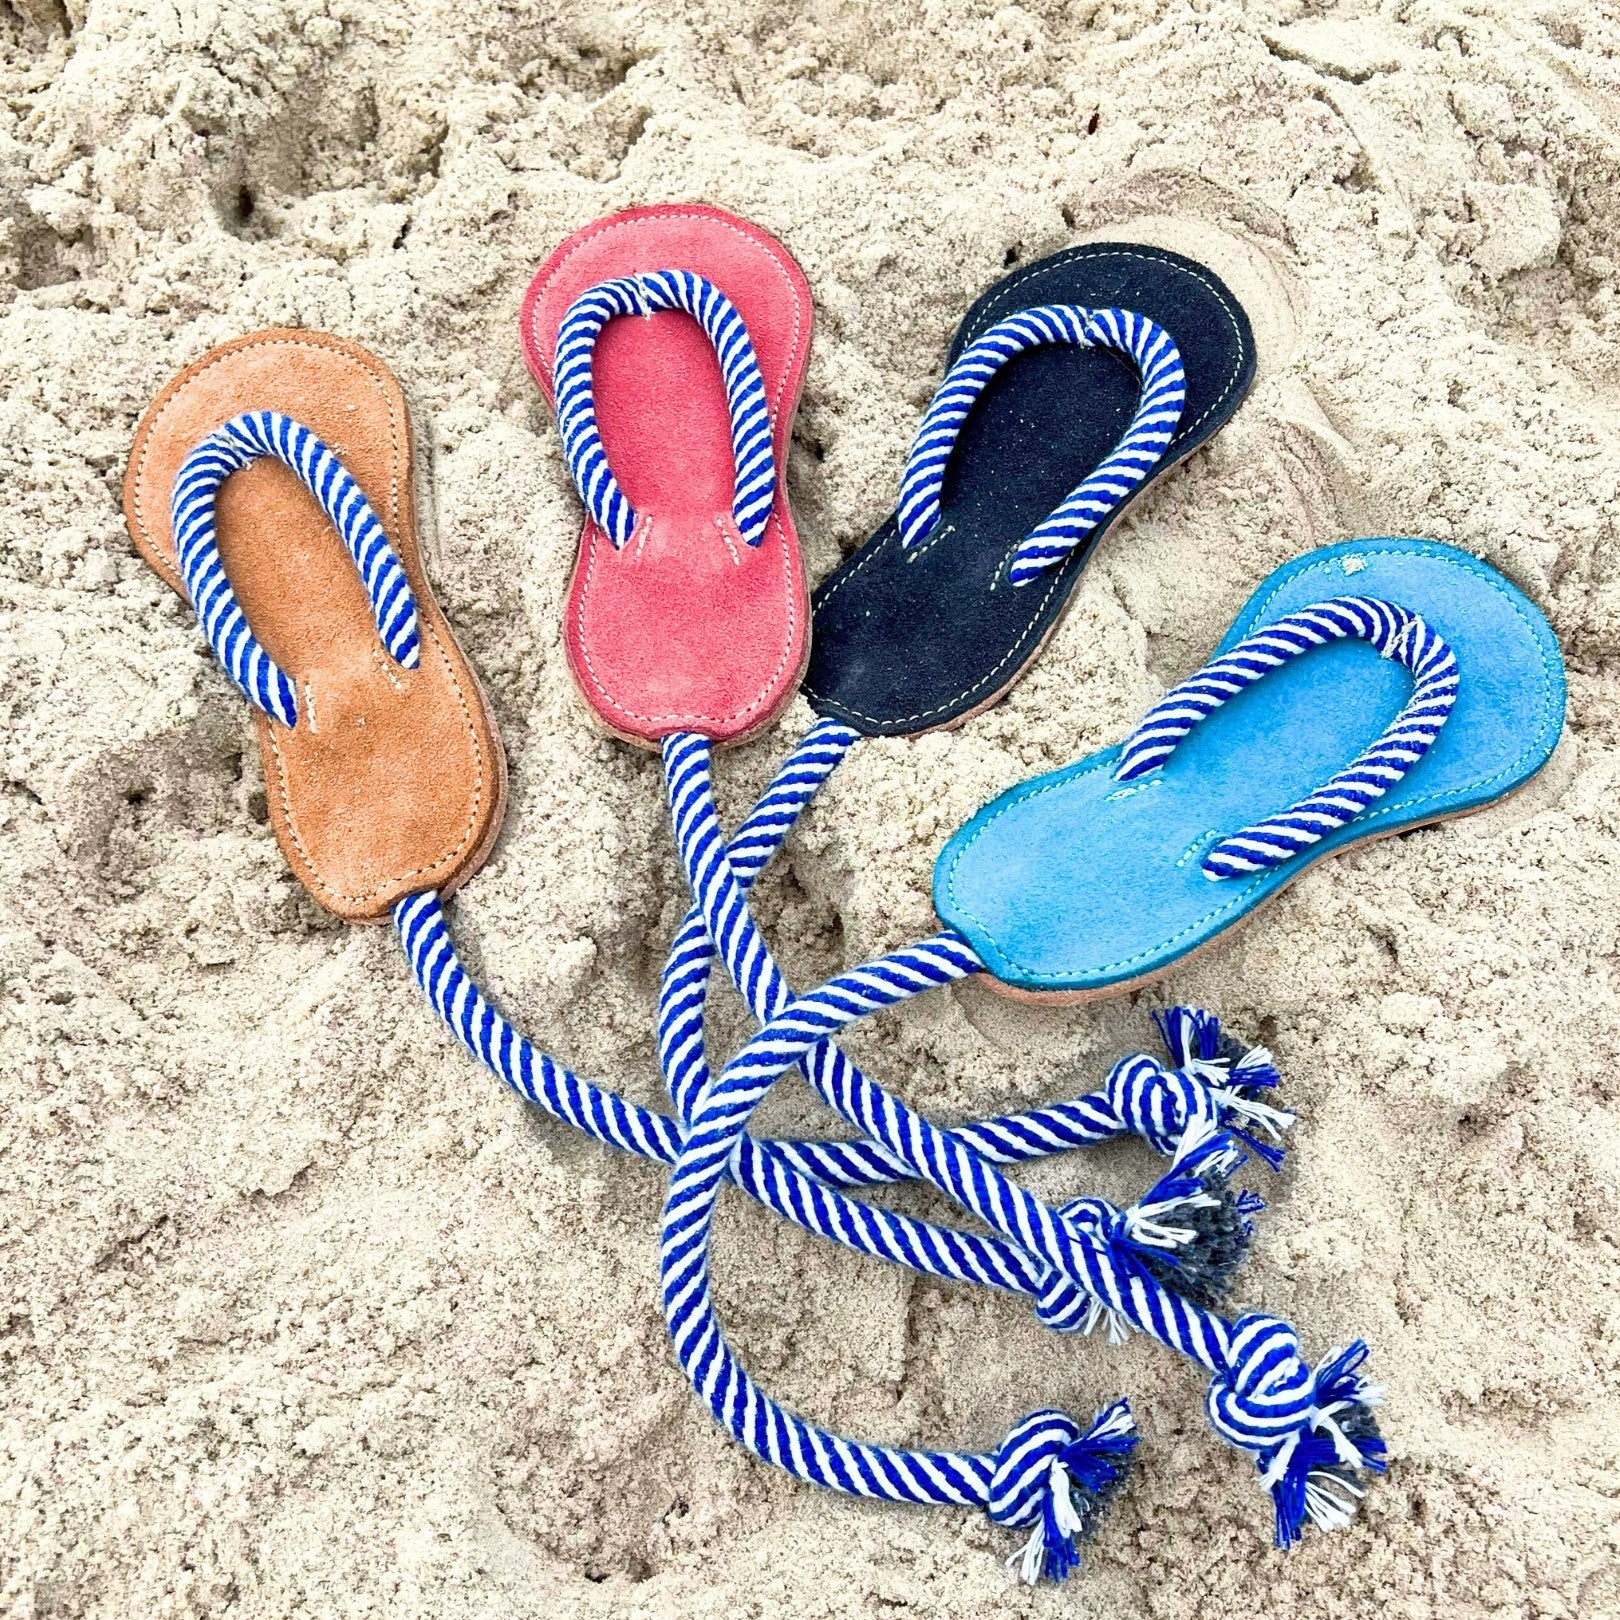 Three pairs of Georgie Paws pink Jandals with blue and white striped straps are arranged in a triangle on sandy beach terrain, suggesting a relaxed day at the sea with puppies playing nearby.